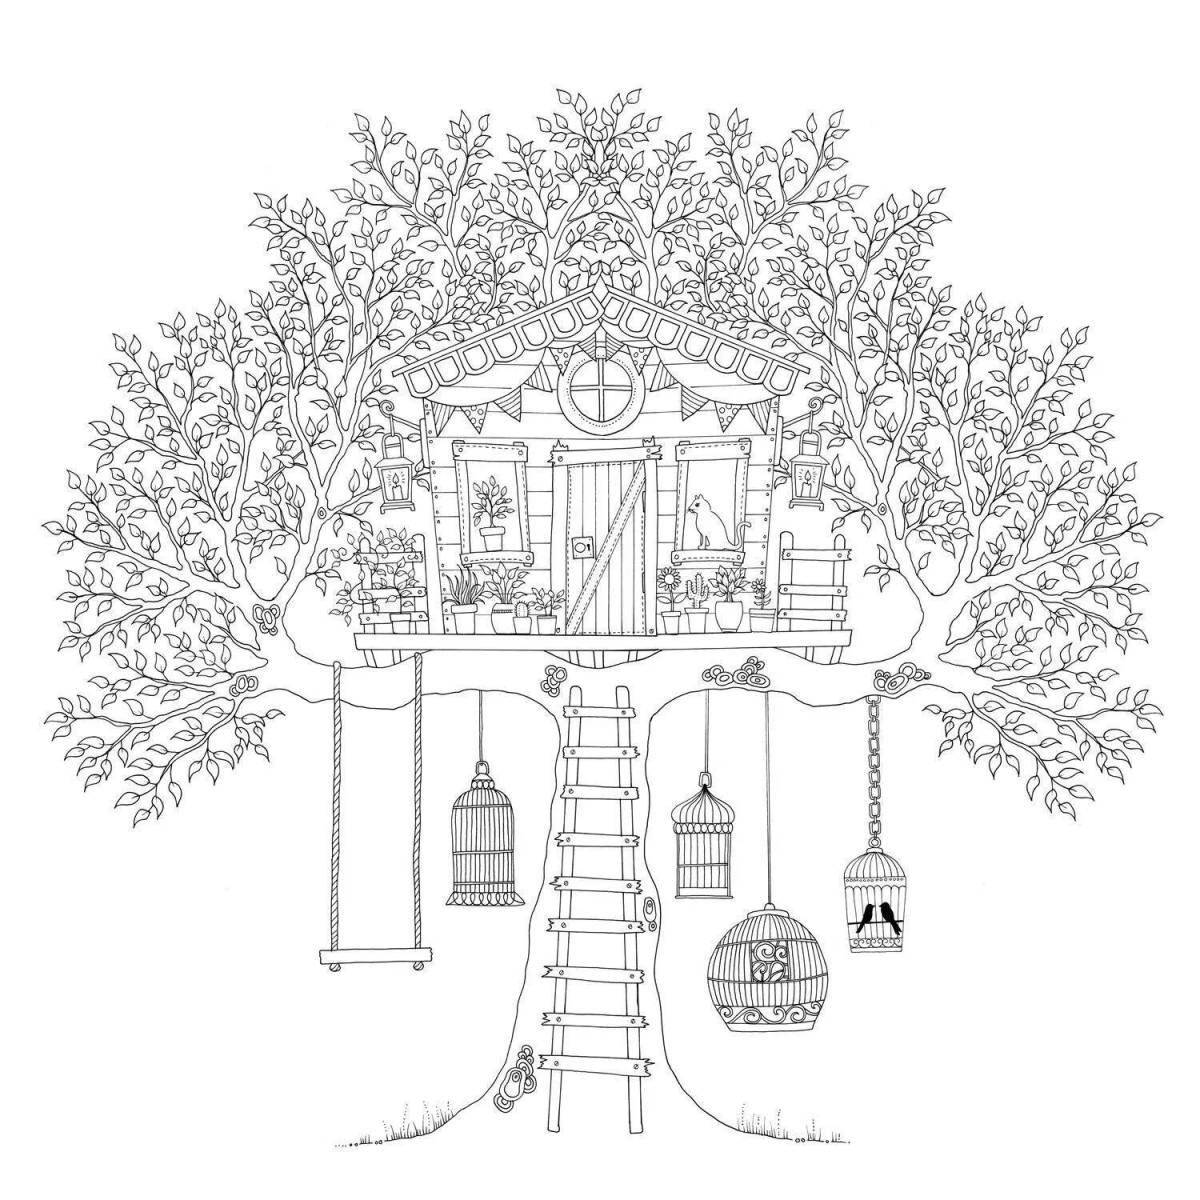 Sky forest coloring page